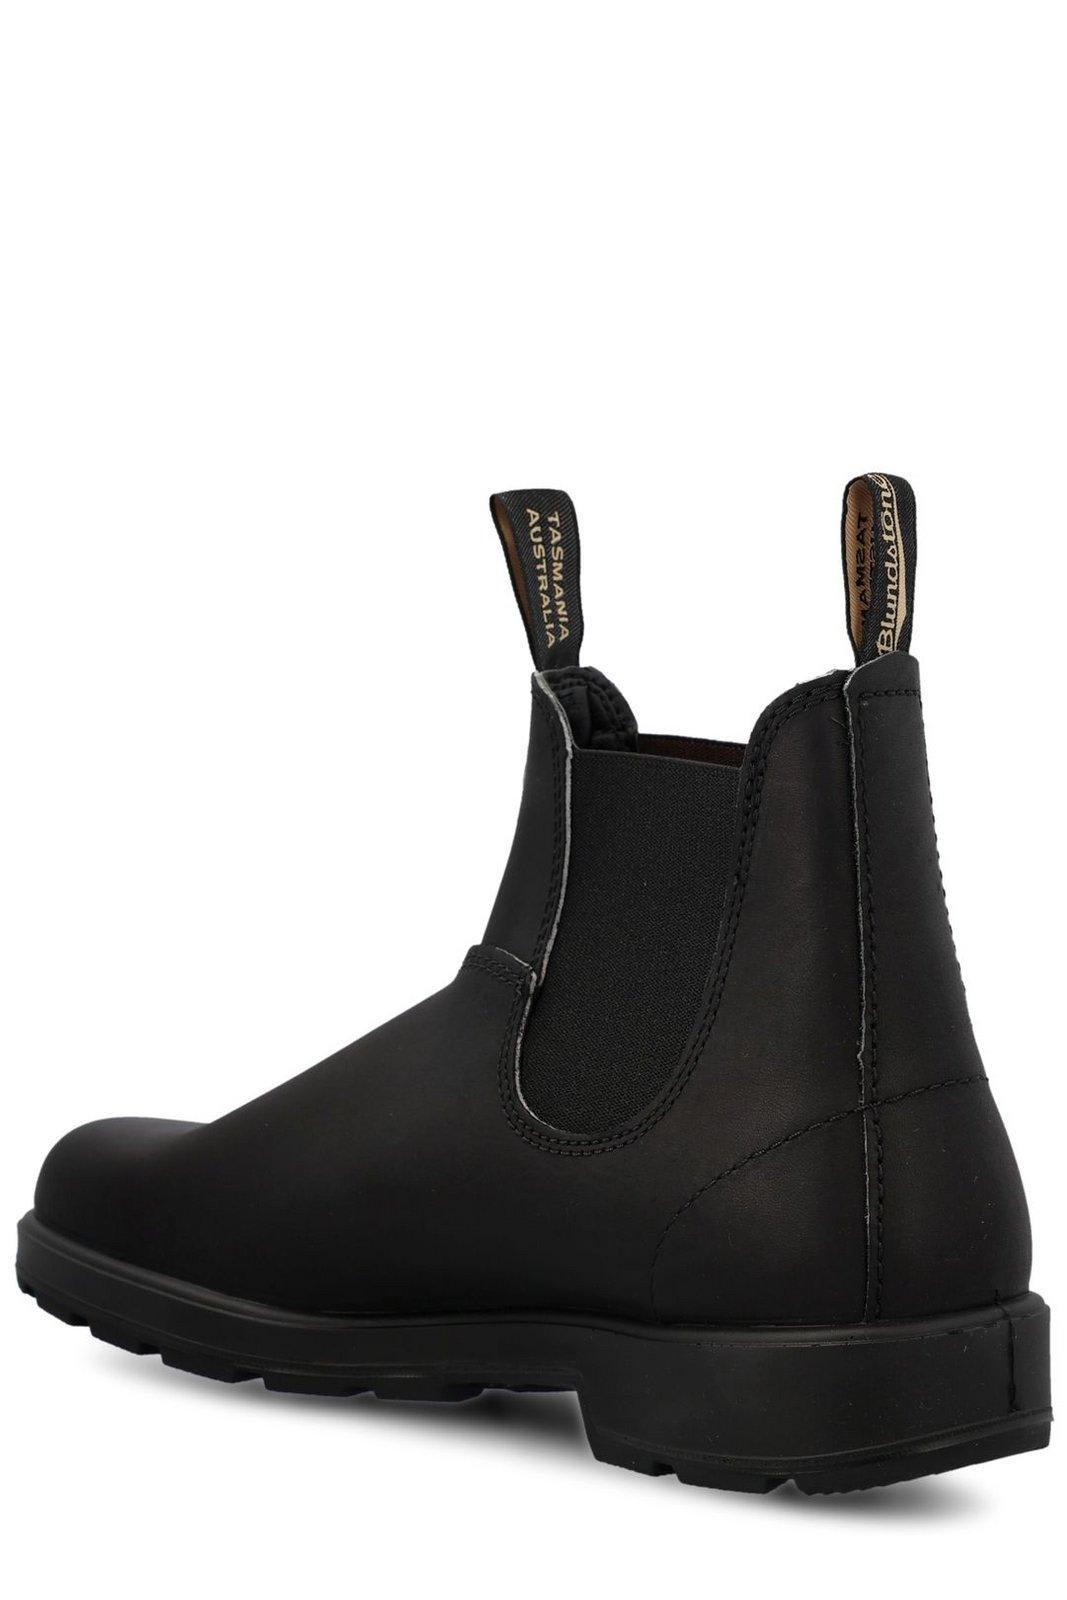 Shop Blundstone Round-toe Ankle Boots In Black